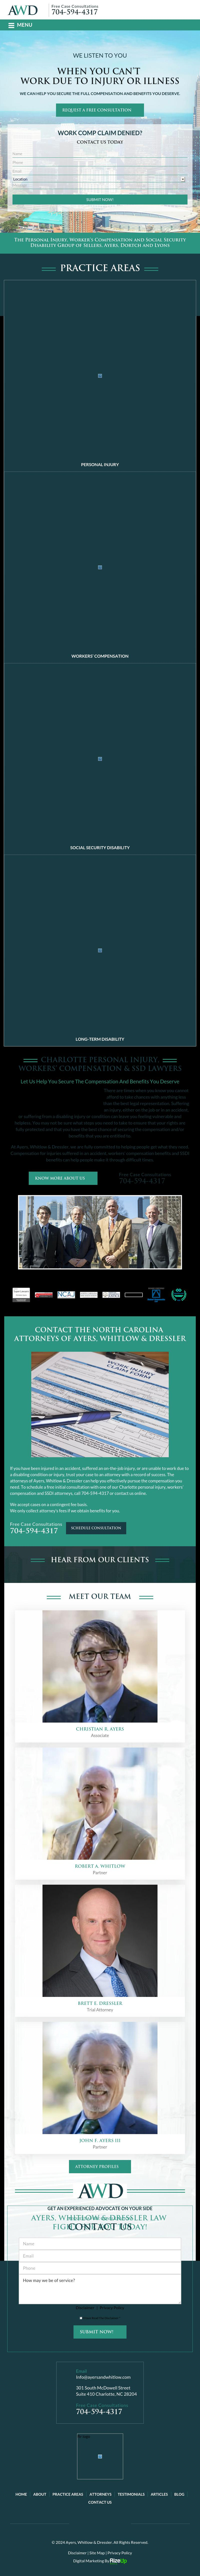 Ayers, Whitlow & Dressler - Charlotte NC Lawyers